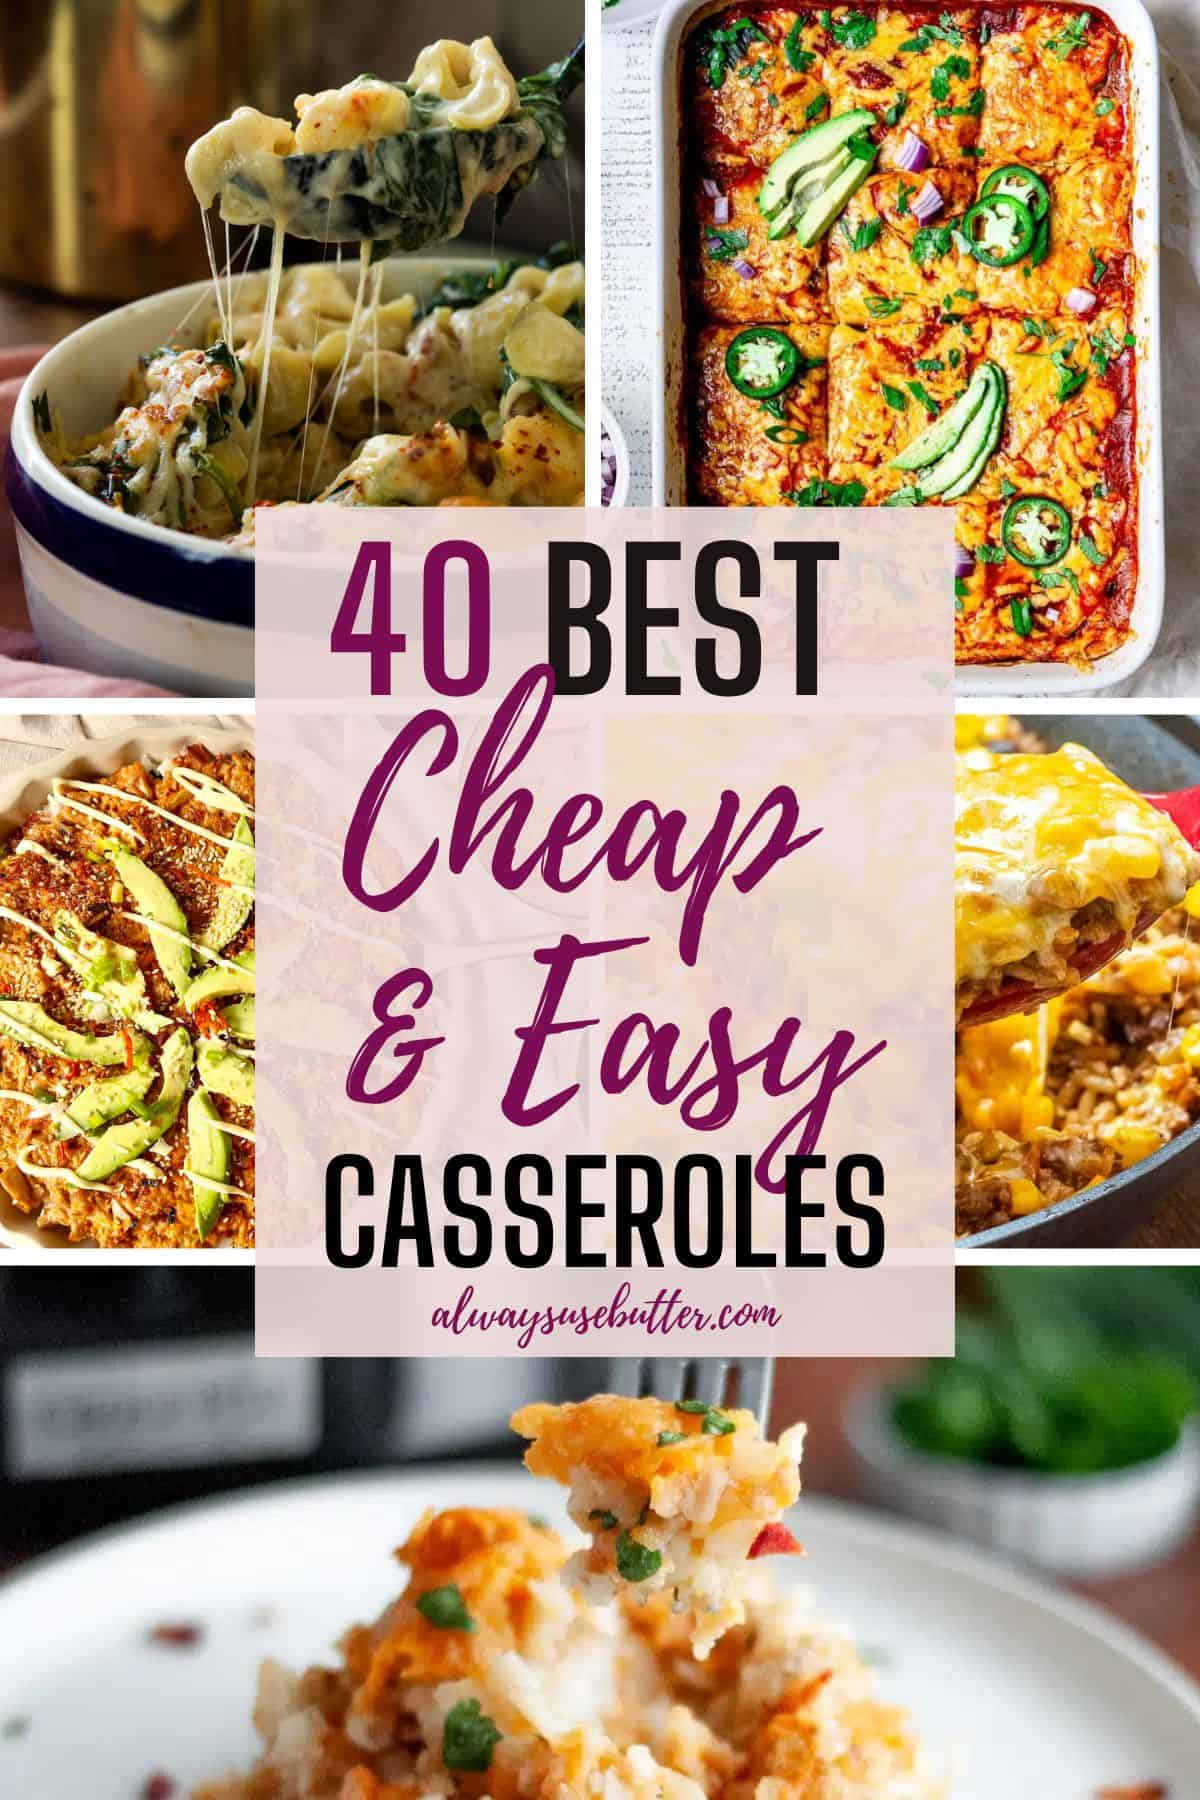 Collage showing different cheap and easy casseroles.